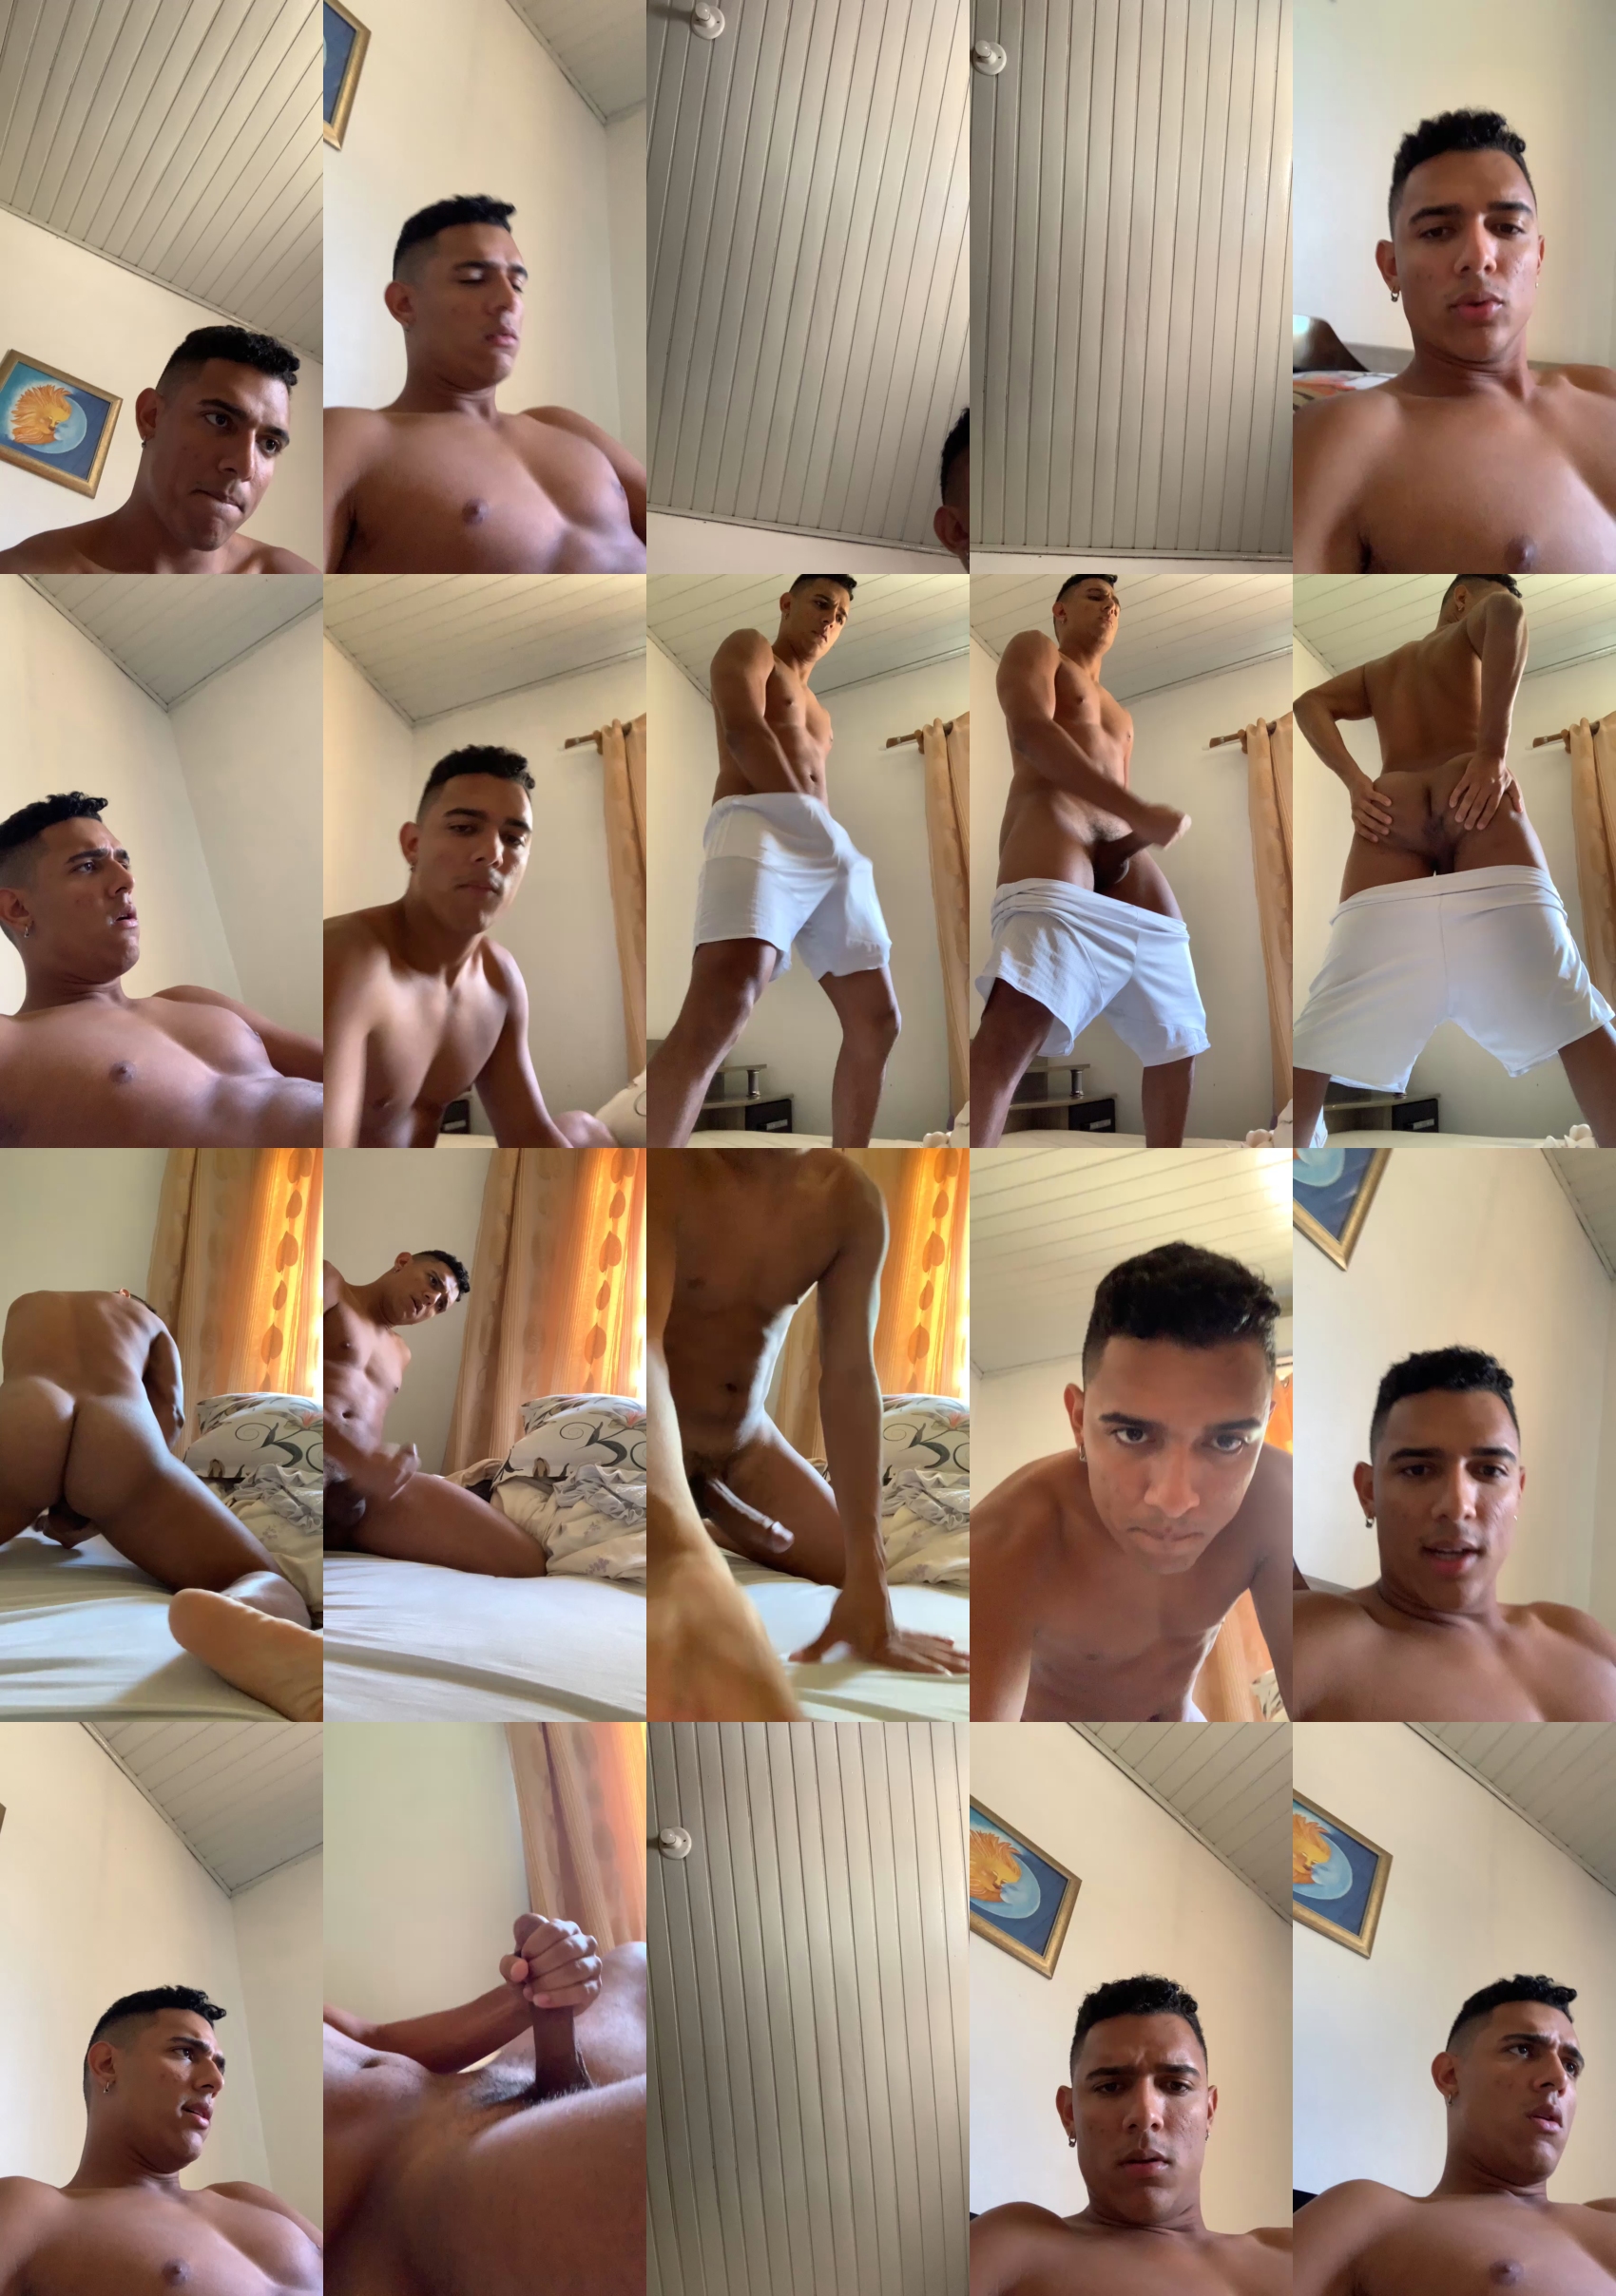 Benjoey  14-06-2022 Recorded Video naked